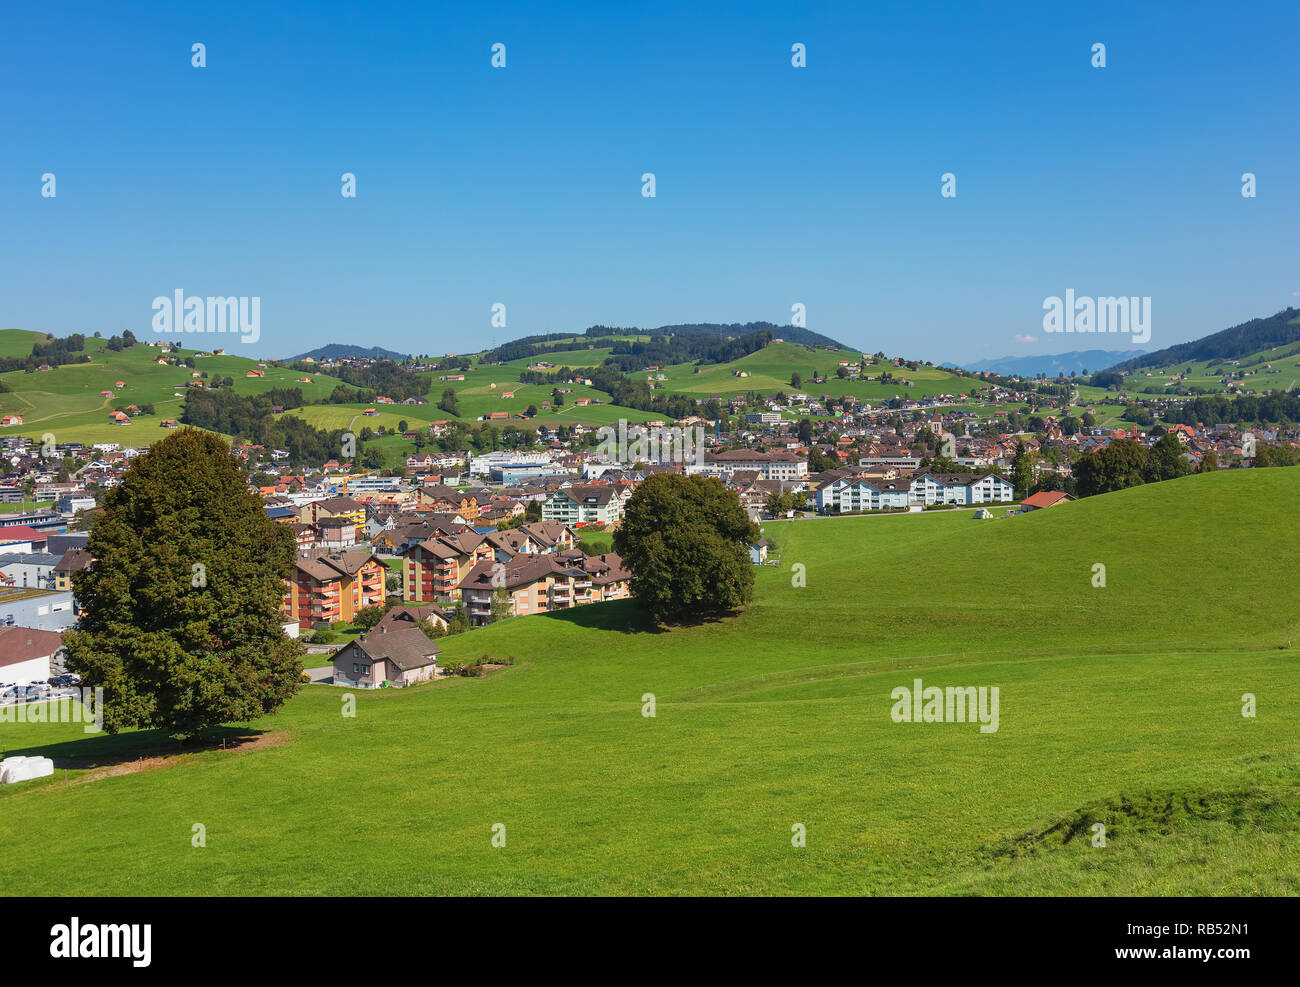 Buildings of the town of Appenzell in Switzerland. The town of Appenzell is the capital of the Swiss canton of Appenzell Innerrhoden. Stock Photo